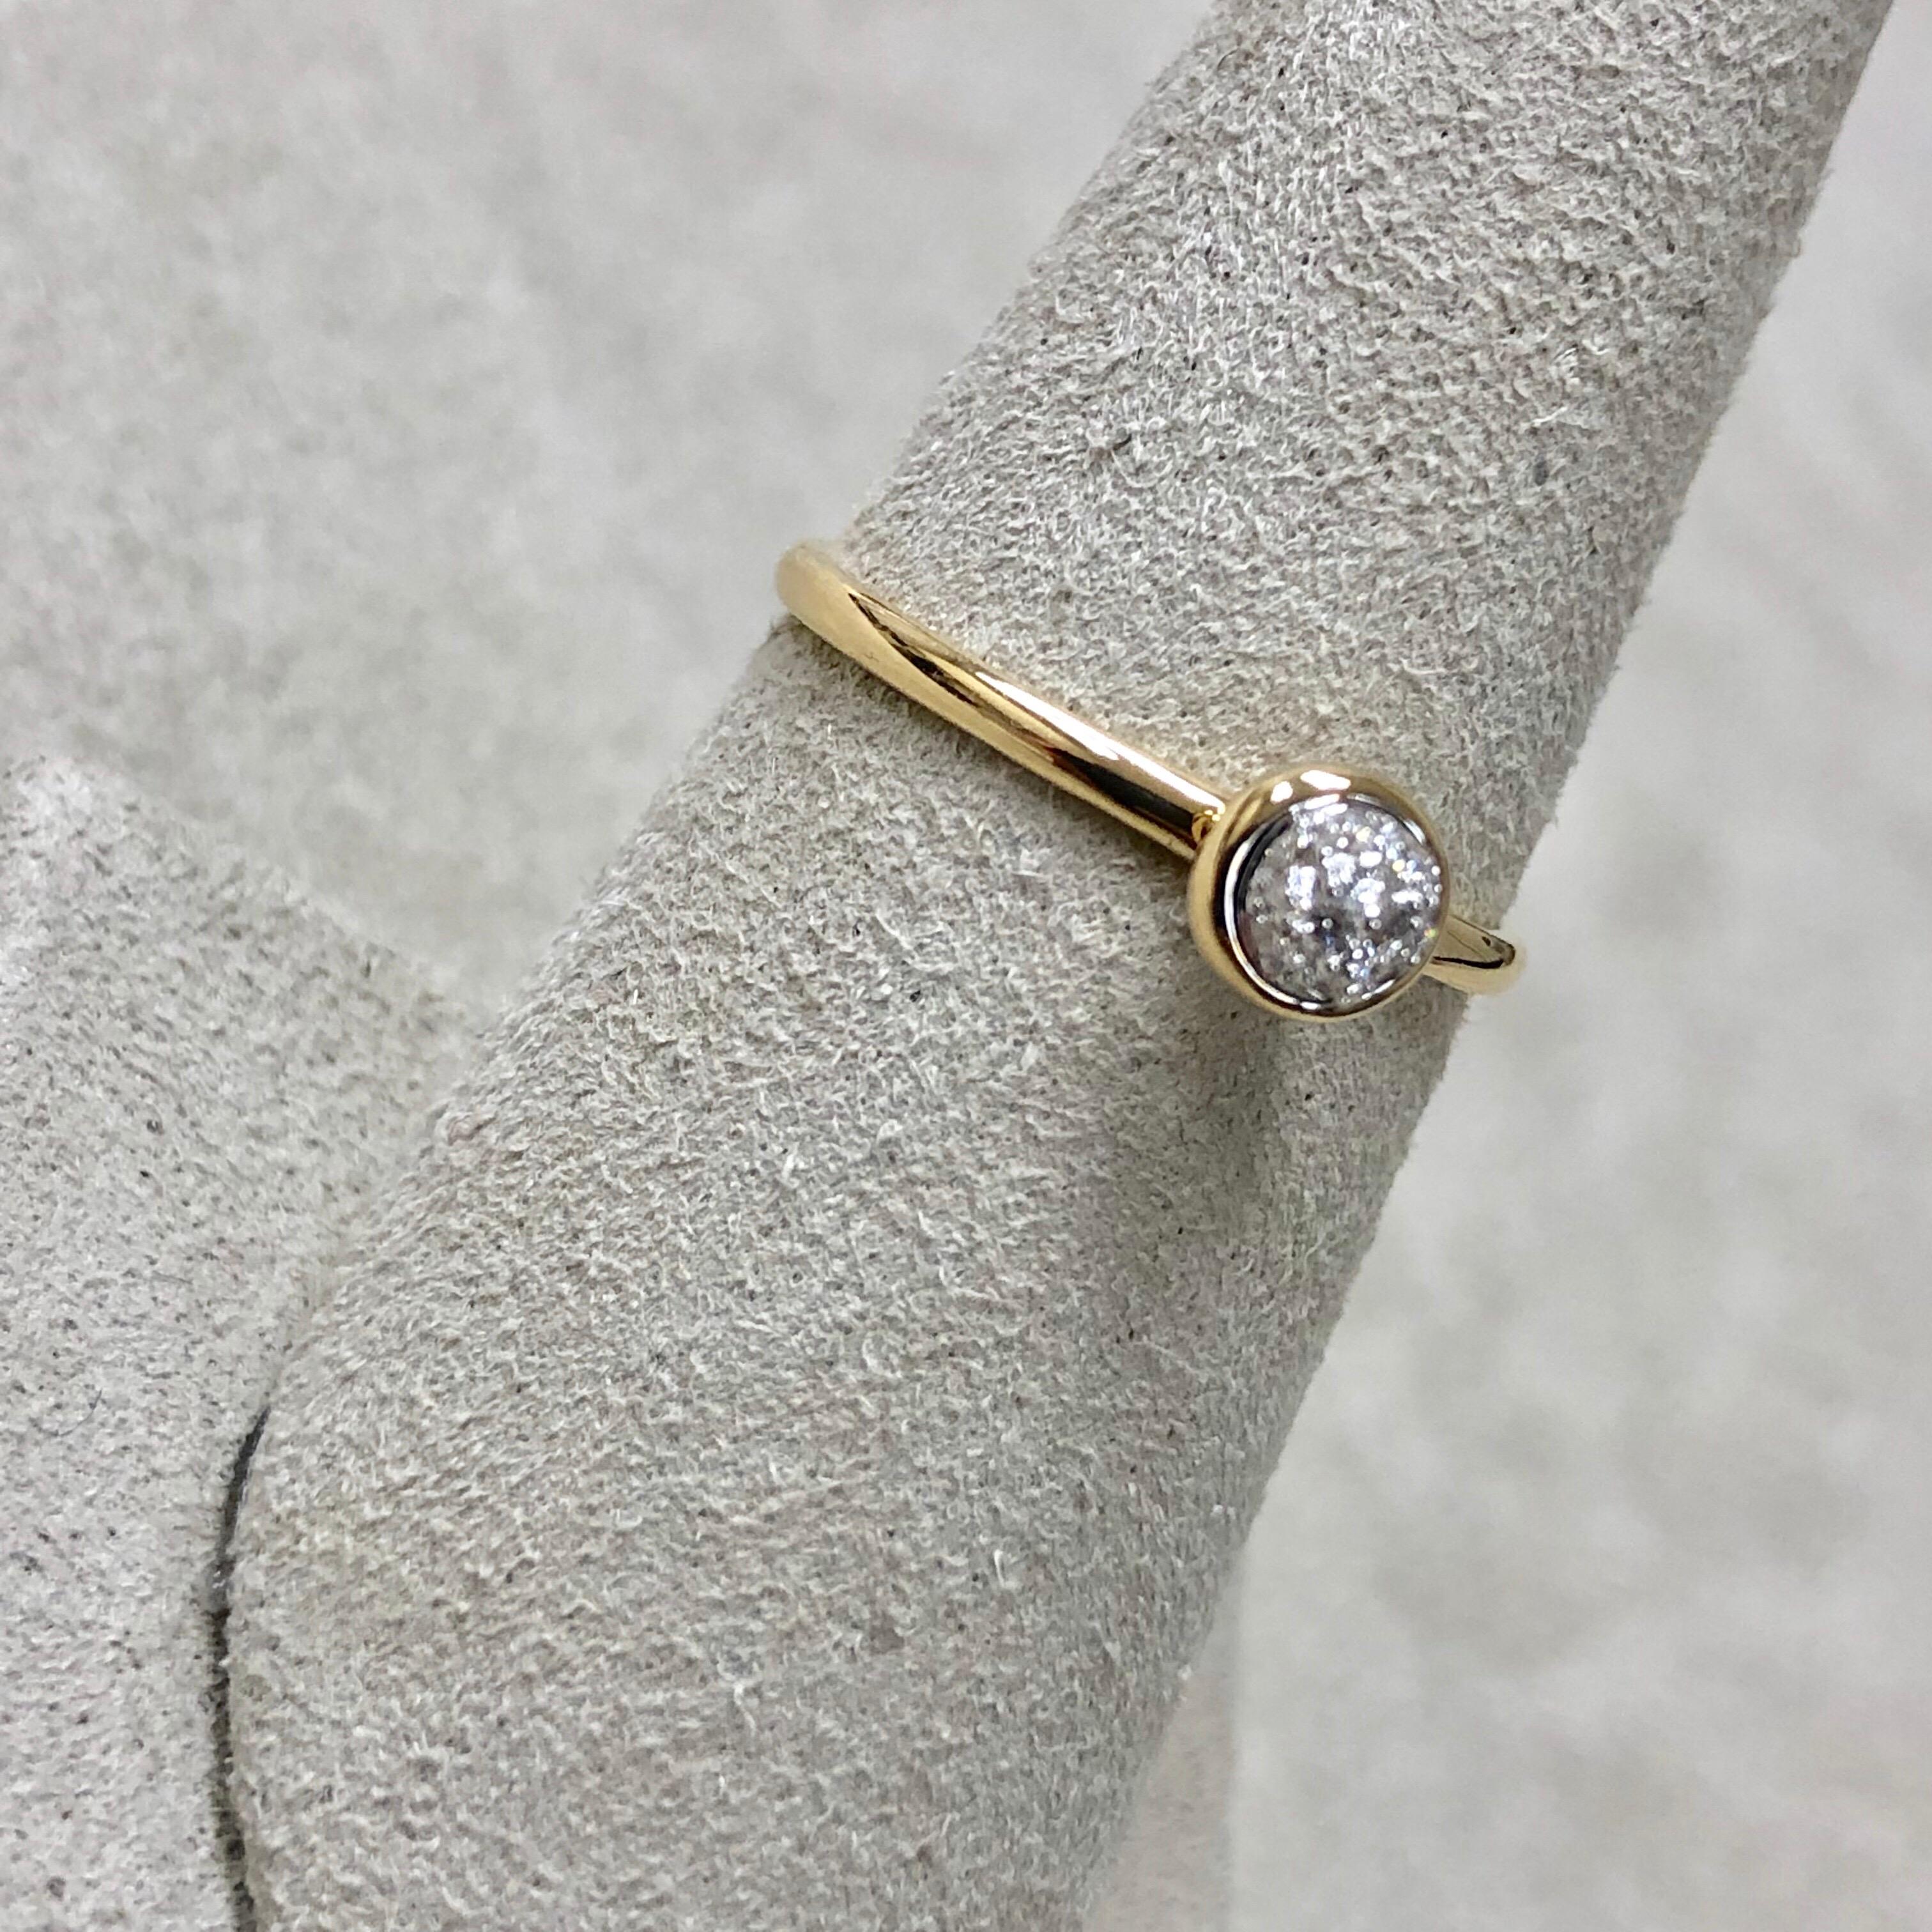 Created in 18 karat yellow gold
Diamonds 0.10 cts approx
Diamond pave ring 5 mm diameter approx
Ring size US 6.5, can be sized upon request.

Shimmering in 18 karat yellow gold, this diamond-paved ring is accented with 0.10 carats of glittering